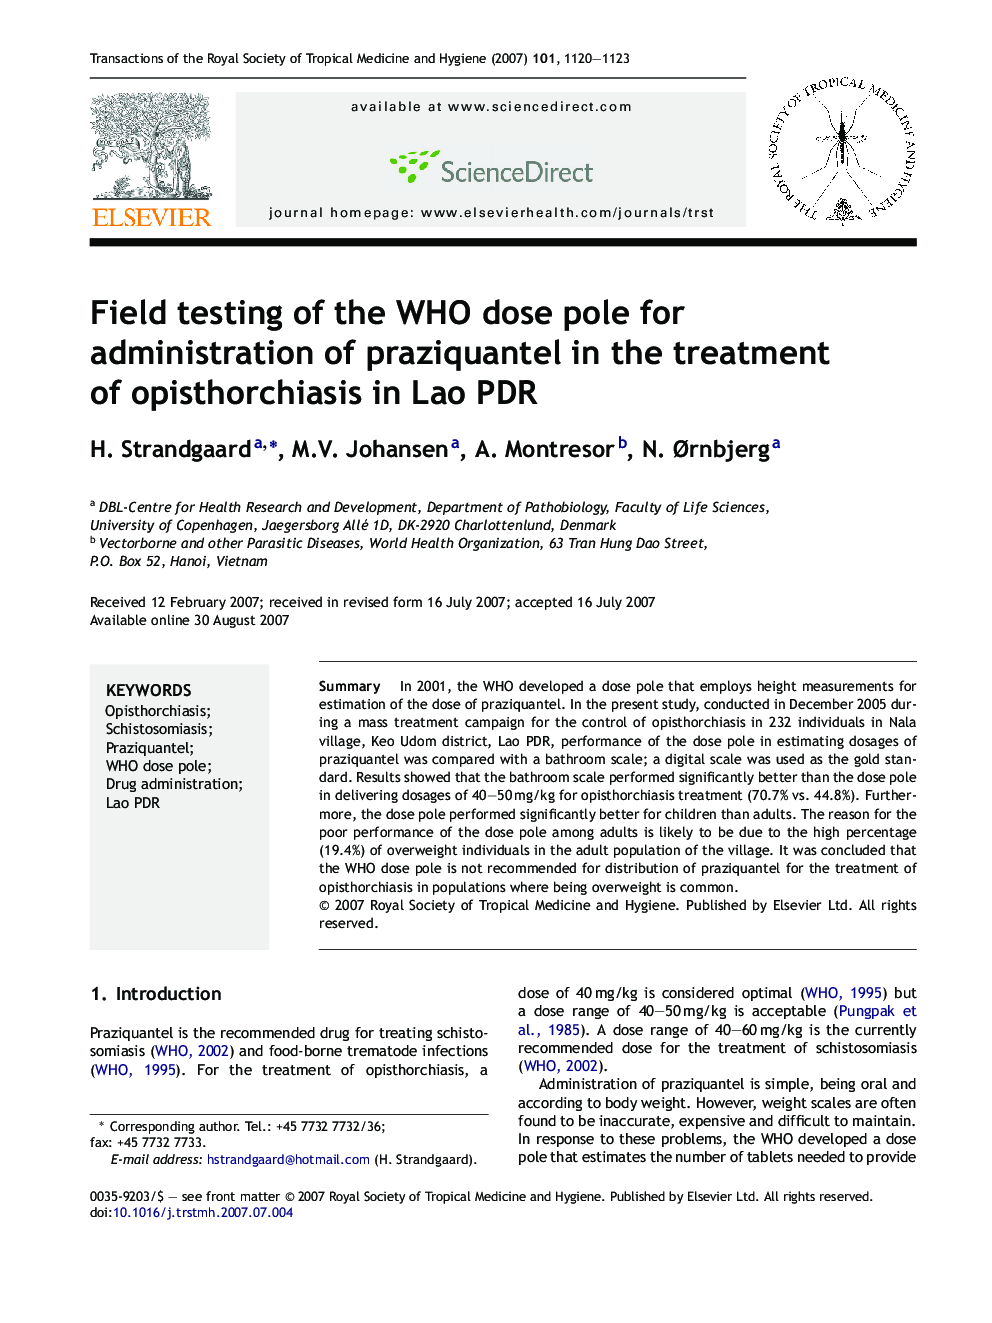 Field testing of the WHO dose pole for administration of praziquantel in the treatment of opisthorchiasis in Lao PDR